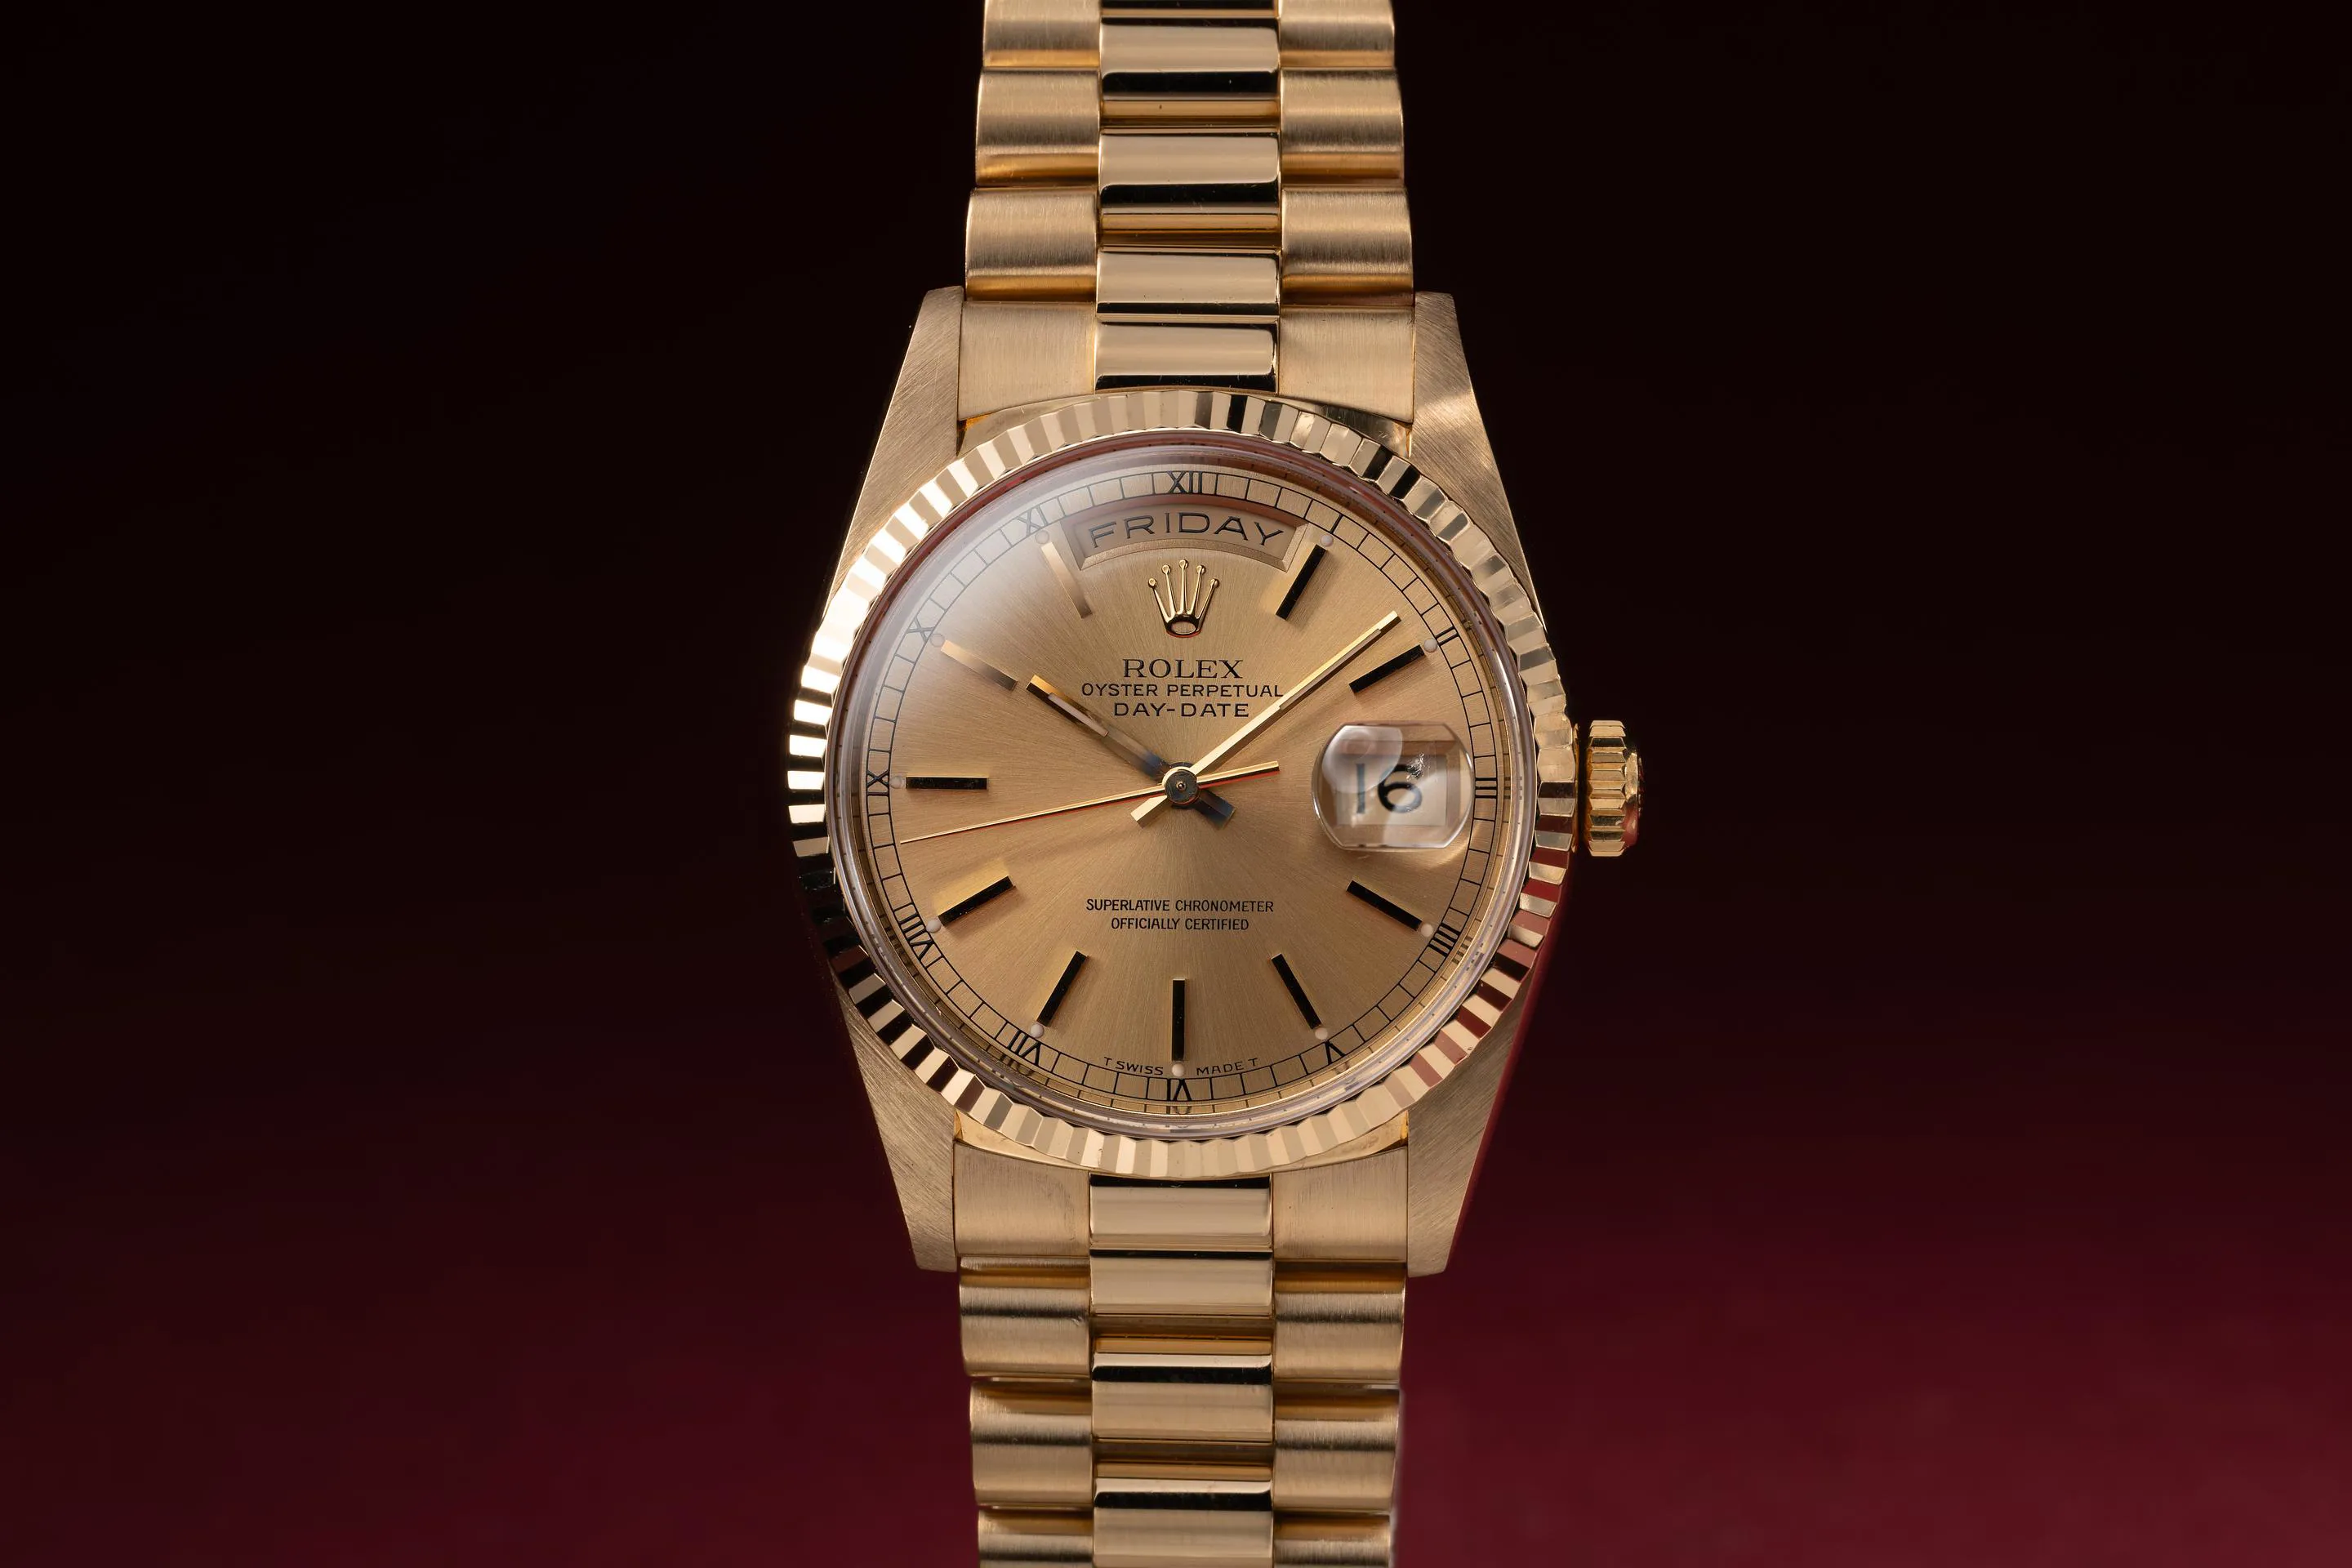 Rolex Day-Date 18238 Yellow gold Champagne